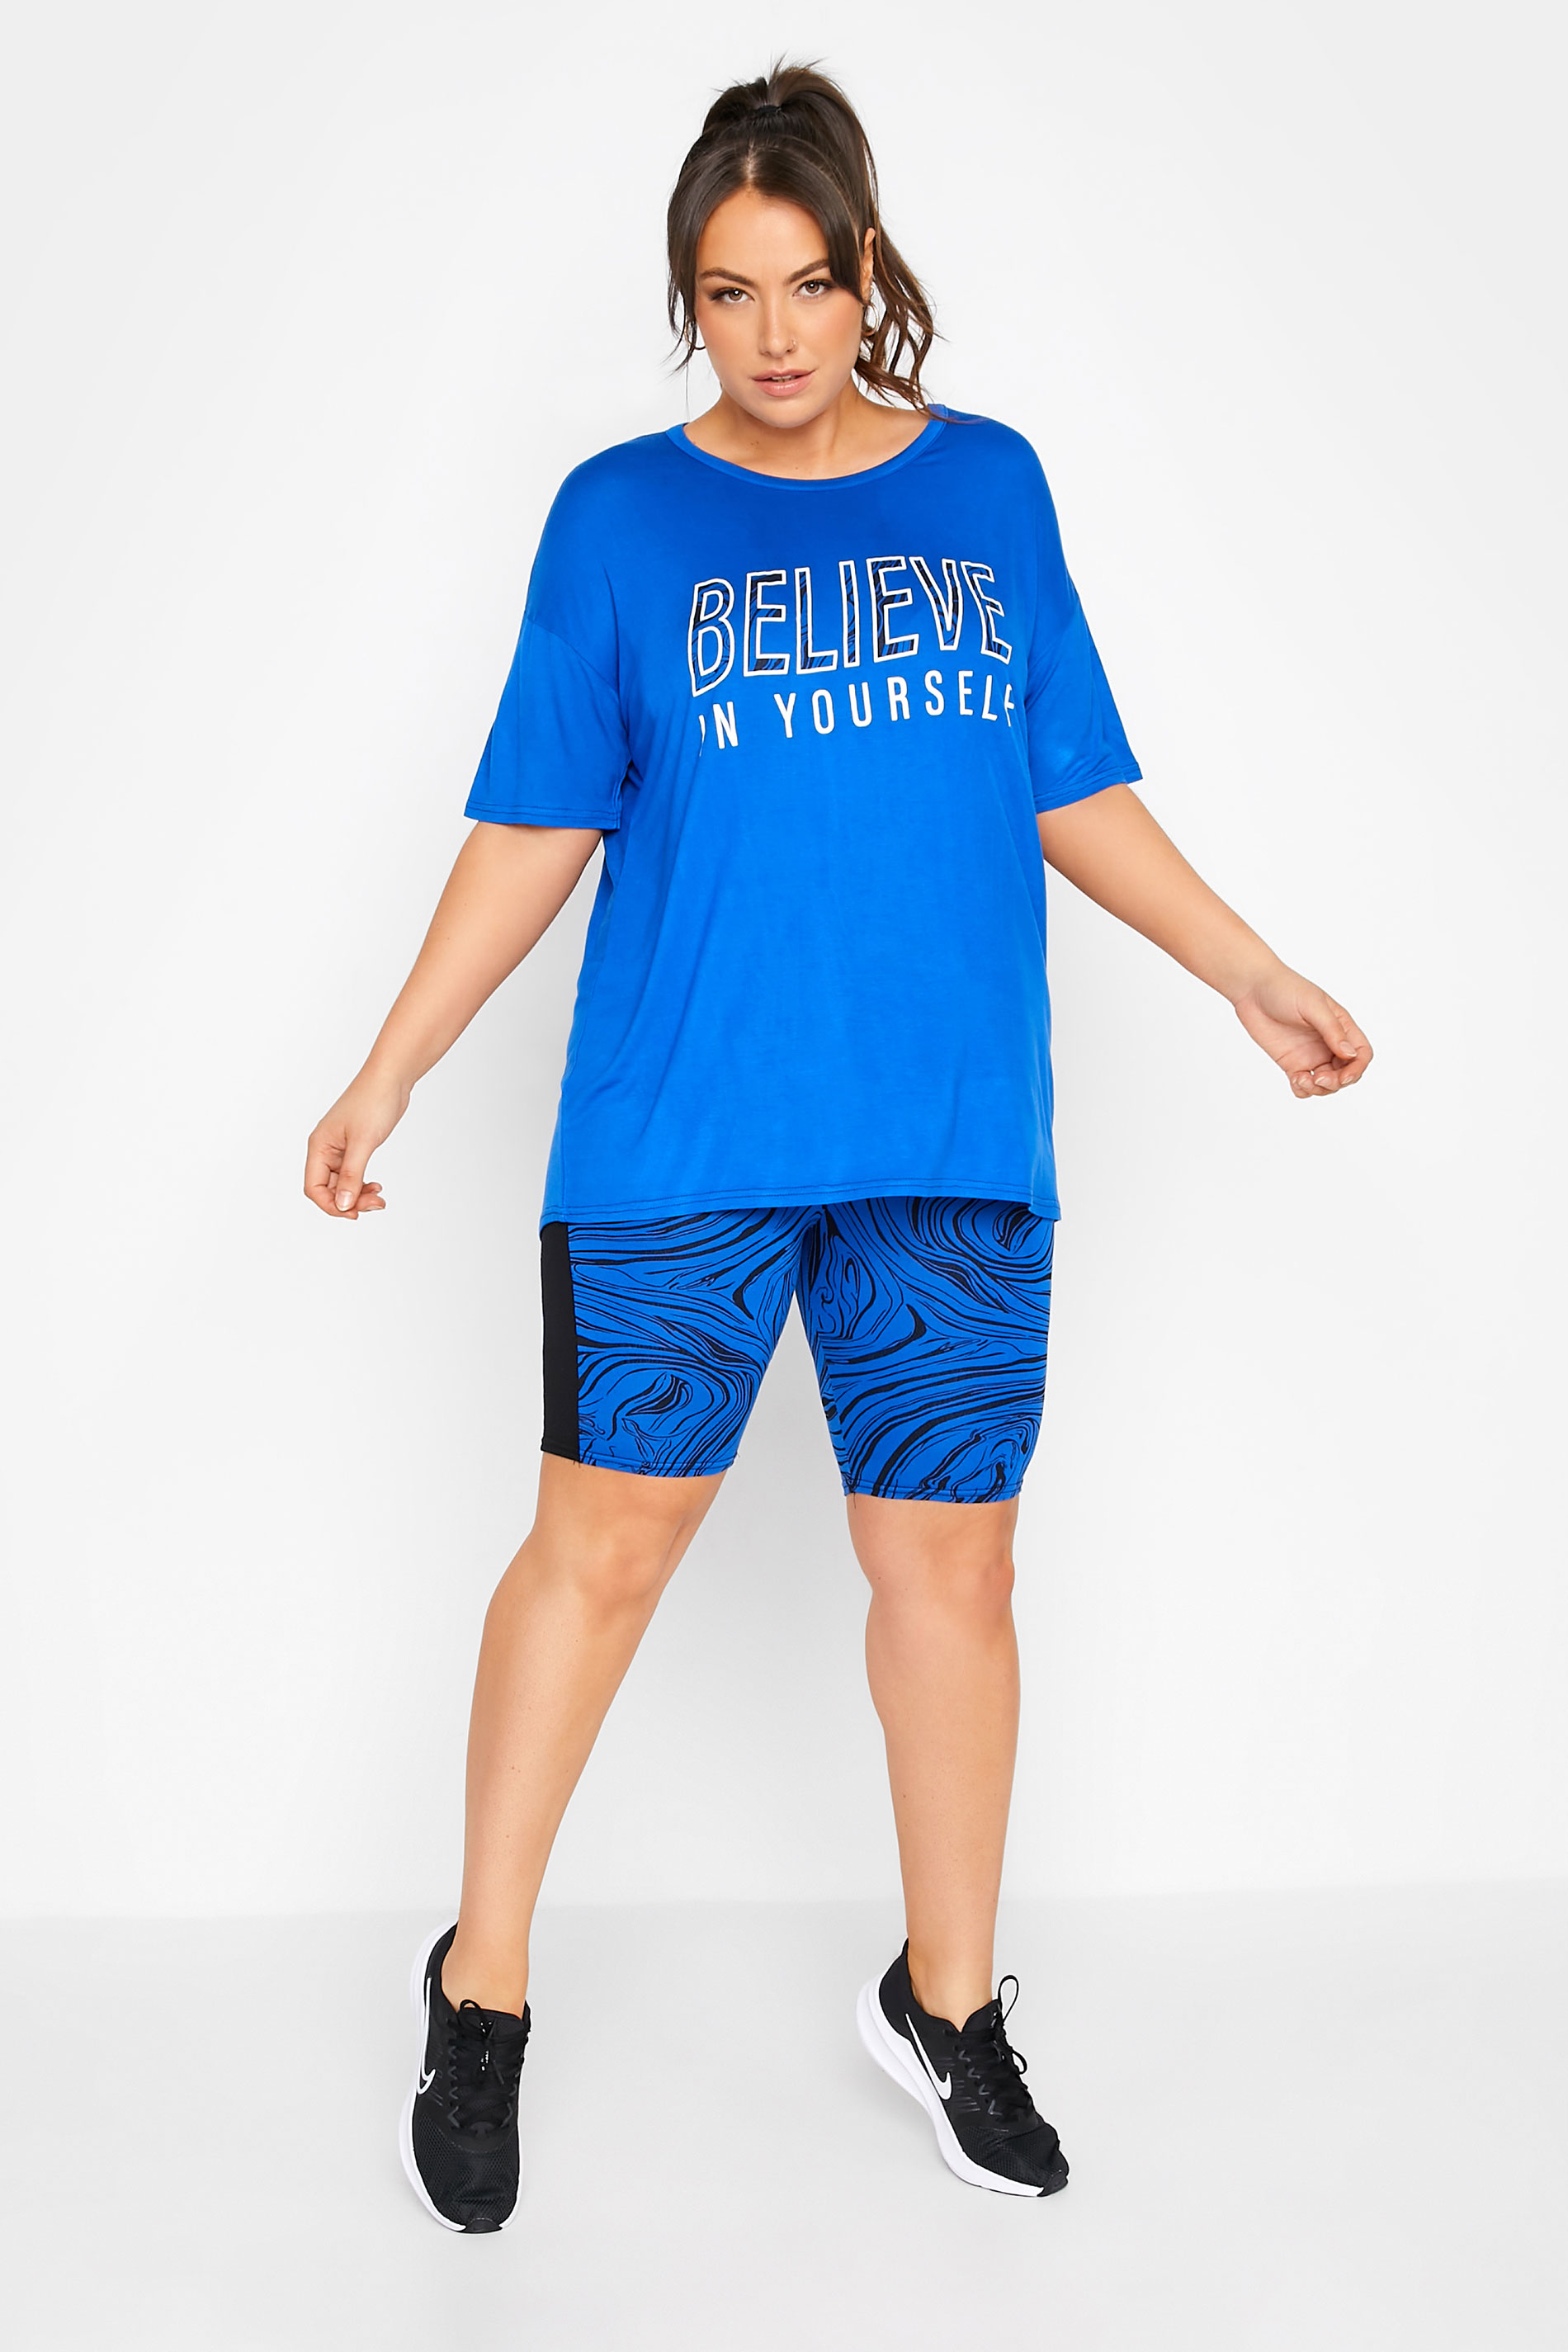 Grande taille  Activewear Grande Taille Grande taille  Active Tops | ACTIVE - T-Shirt Bleu Roi 'Believe in Yourself' - HX16886